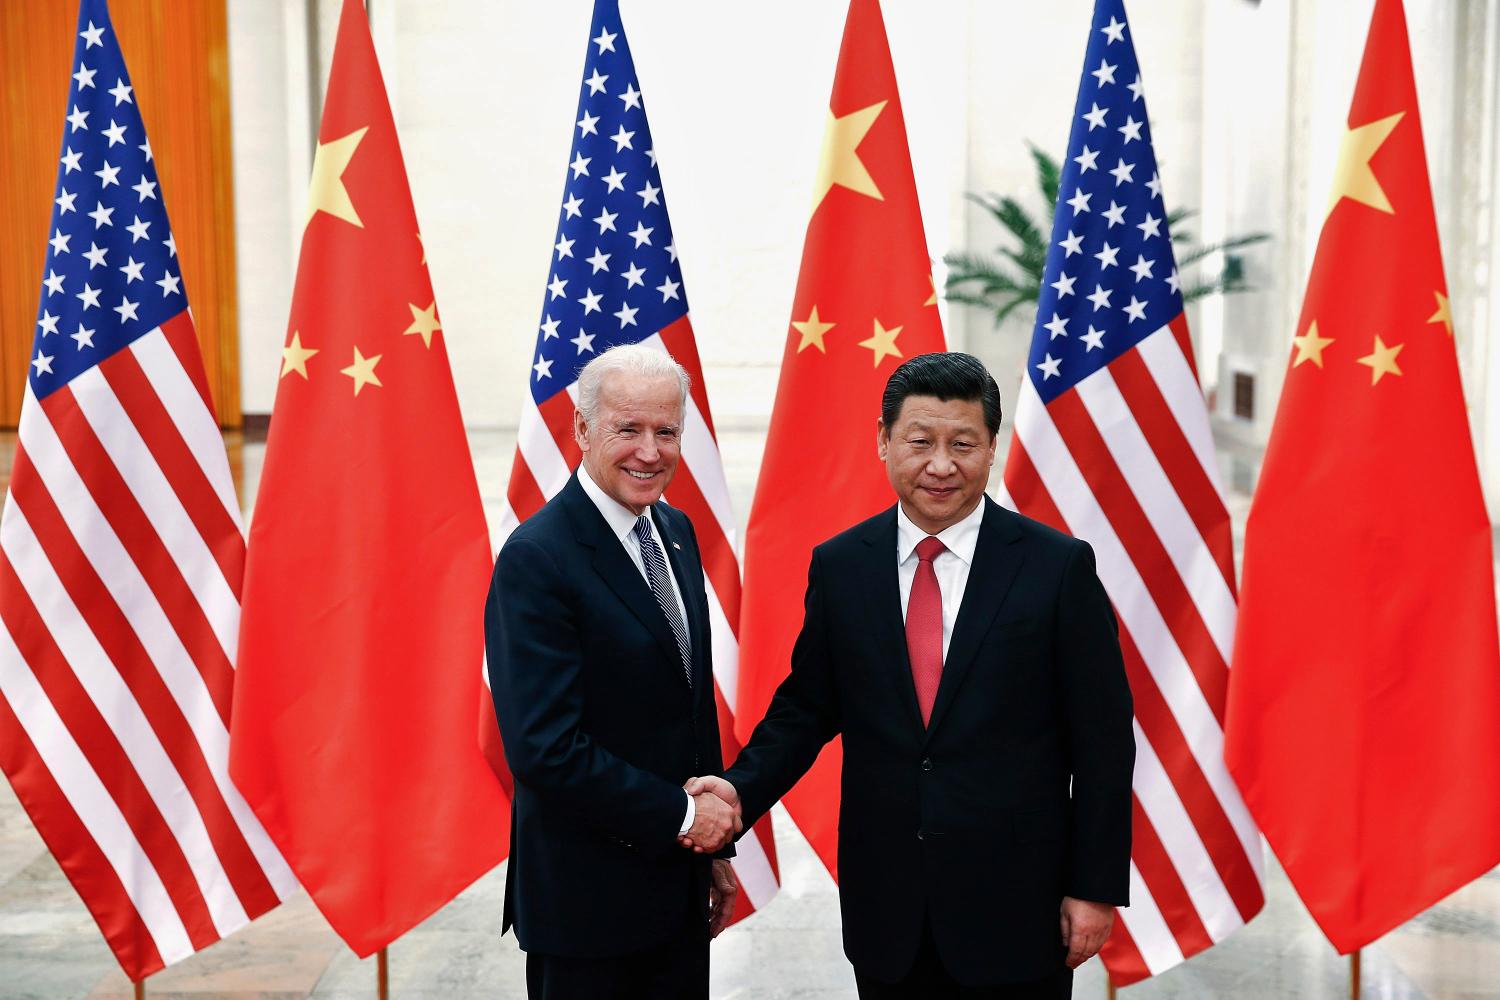 Chinese President Xi Jinping shakes hands with U.S. Vice President Joe Biden (L) inside the Great Hall of the People in Beijing December 4, 2013. REUTERS/Lintao Zhang/Pool (CHINA - Tags: POLITICS)